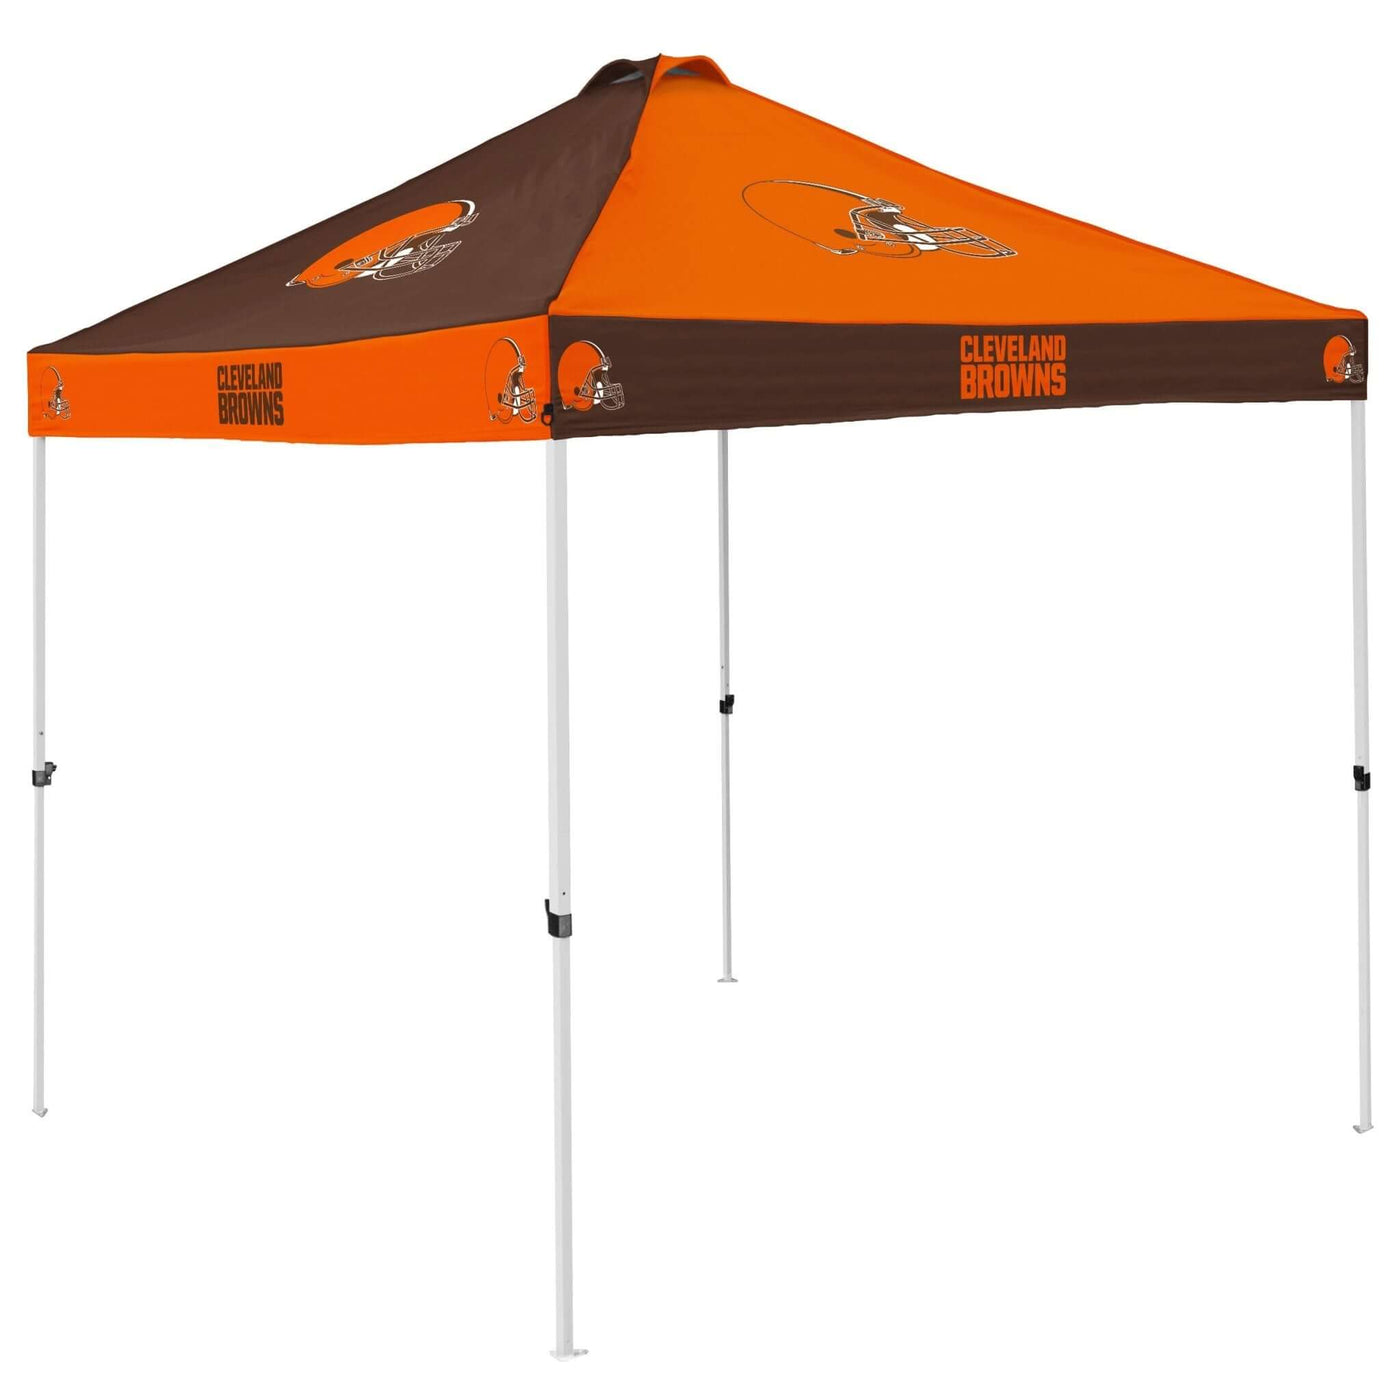 Cleveland Browns Checkerboard Canopy - Logo Brands